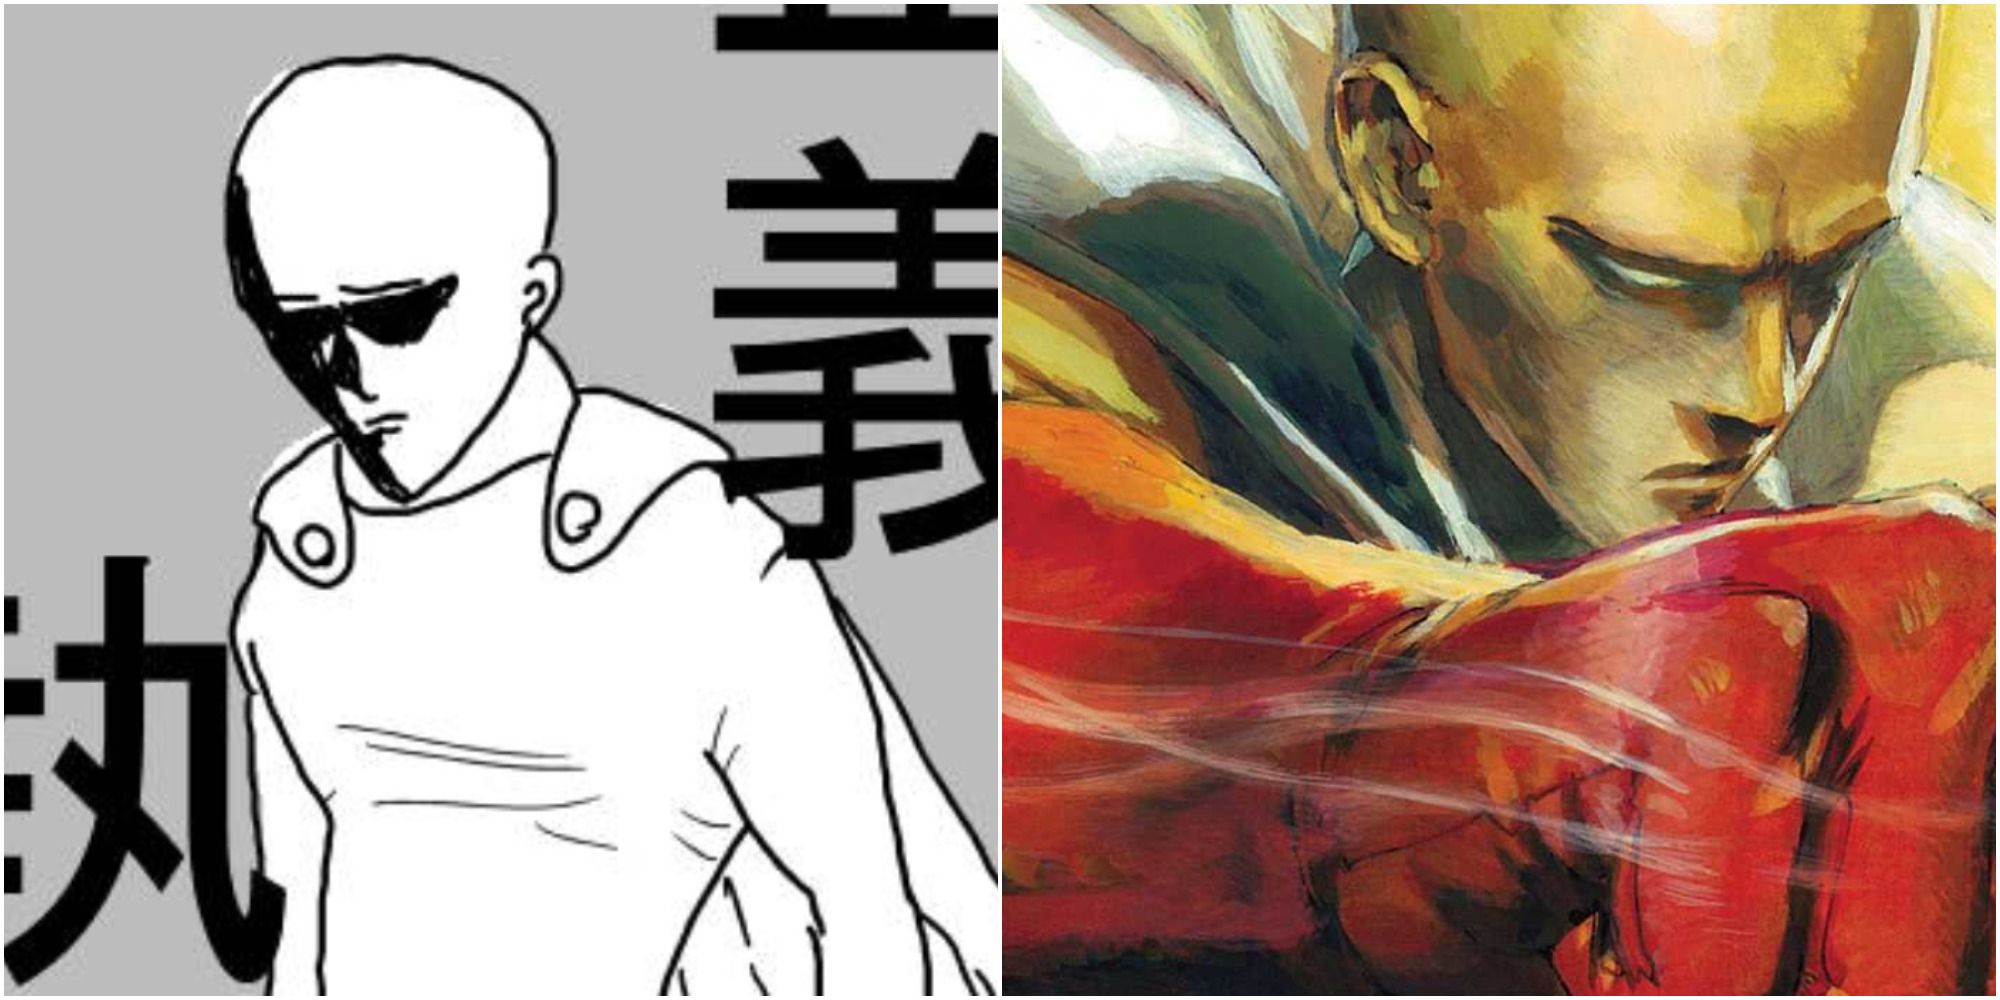 One Punch Man: Where to begin with the manga